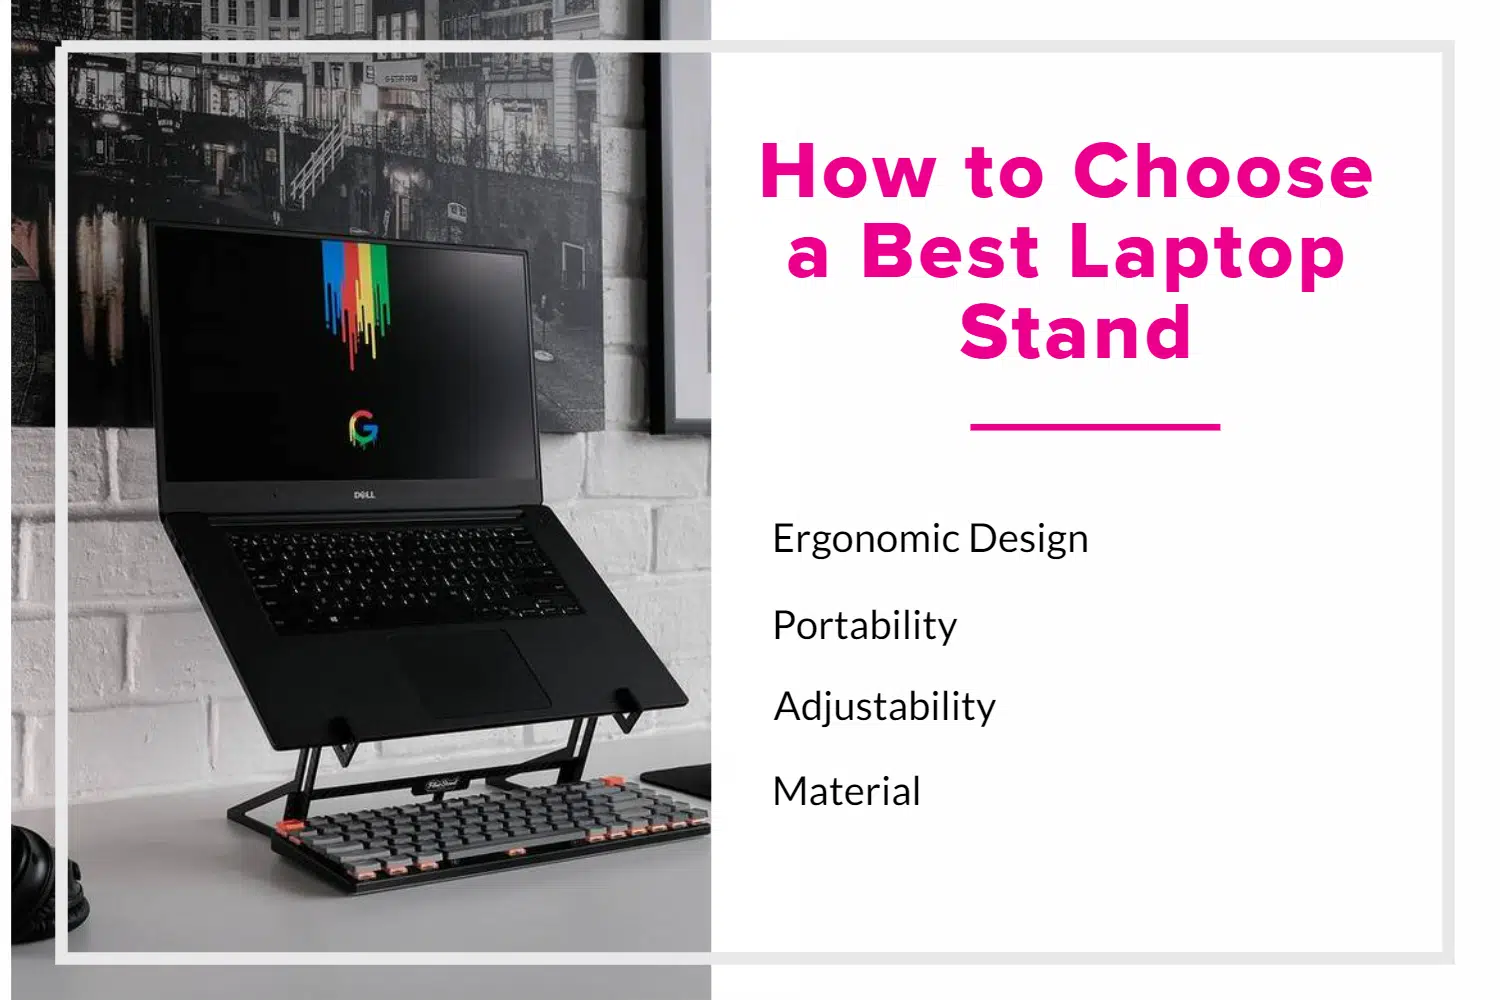 https://justcreative.com/wp-content/uploads/2022/05/How-to-Choose-the-best-laptop-stnad.png.webp